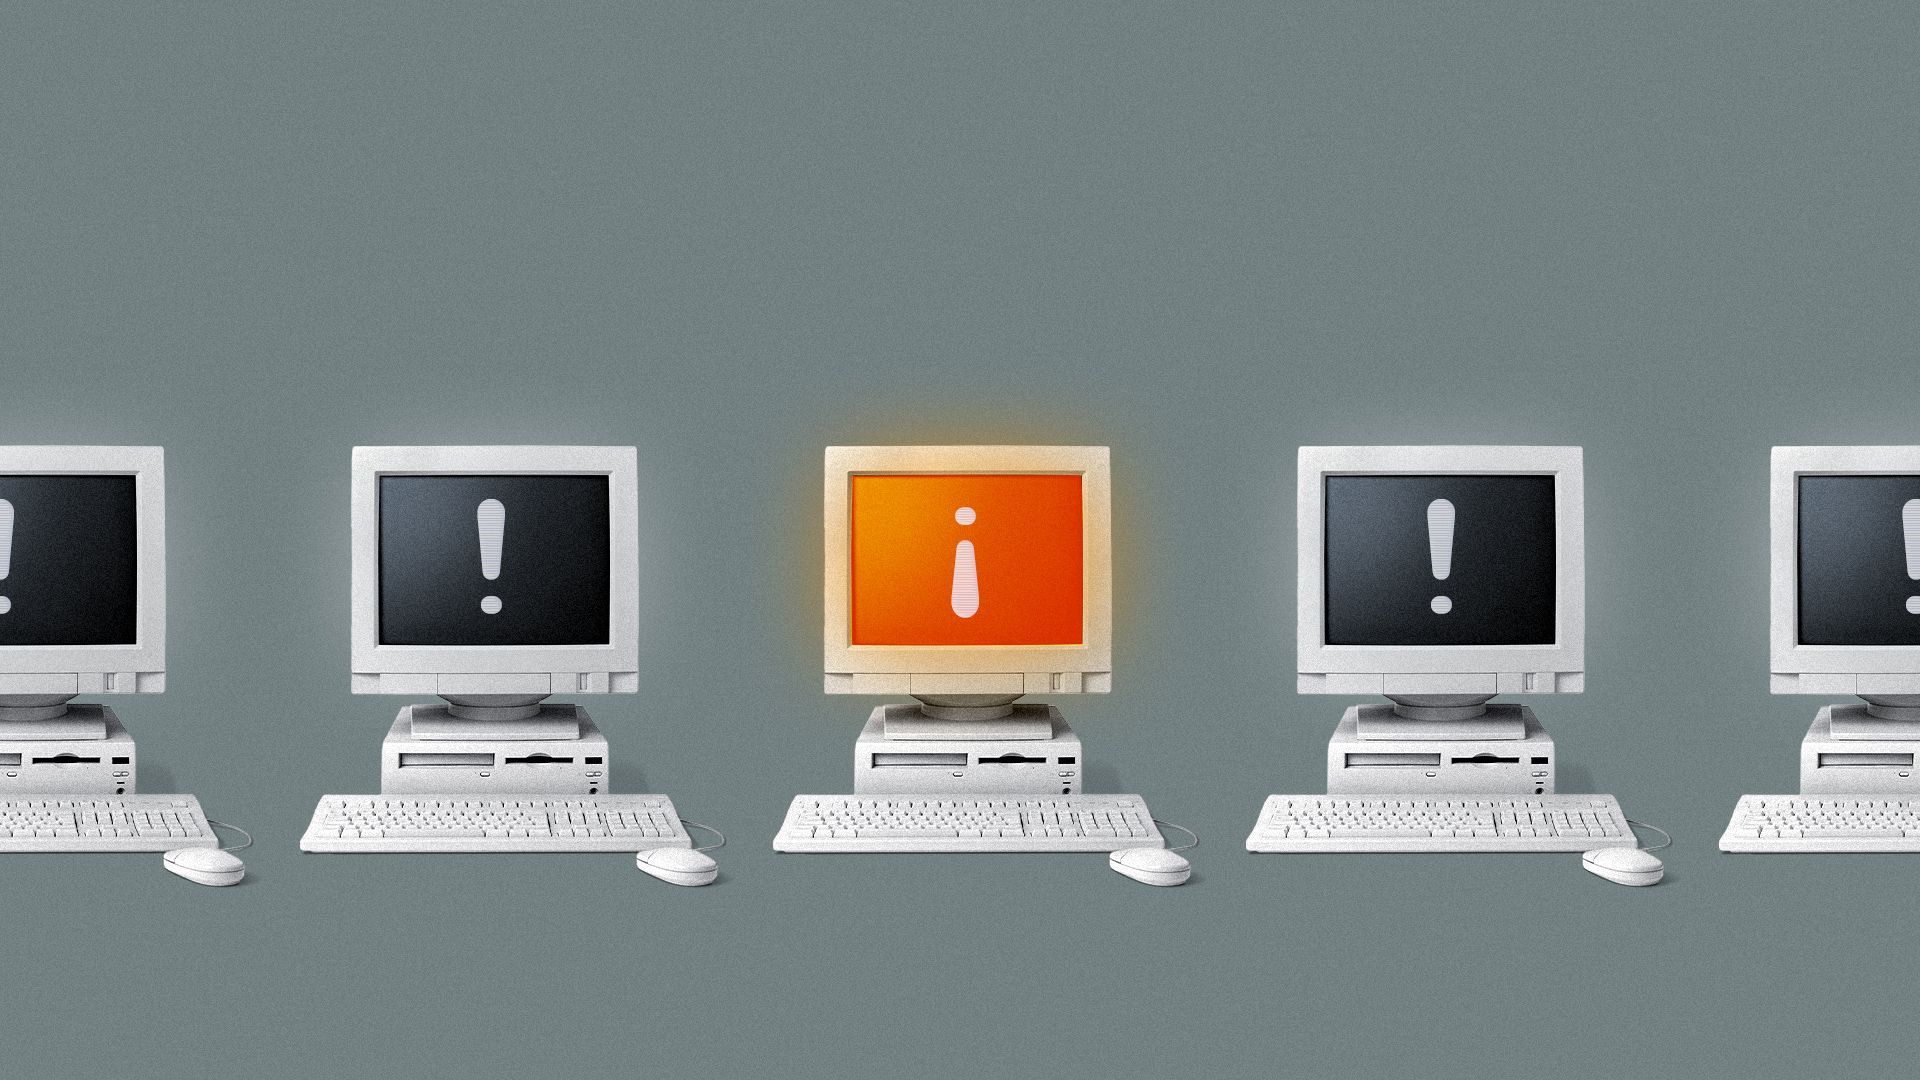 Illustration of a line of computers with exclamation marks on their screens, the one in the center has an inverted exclamation mark. 